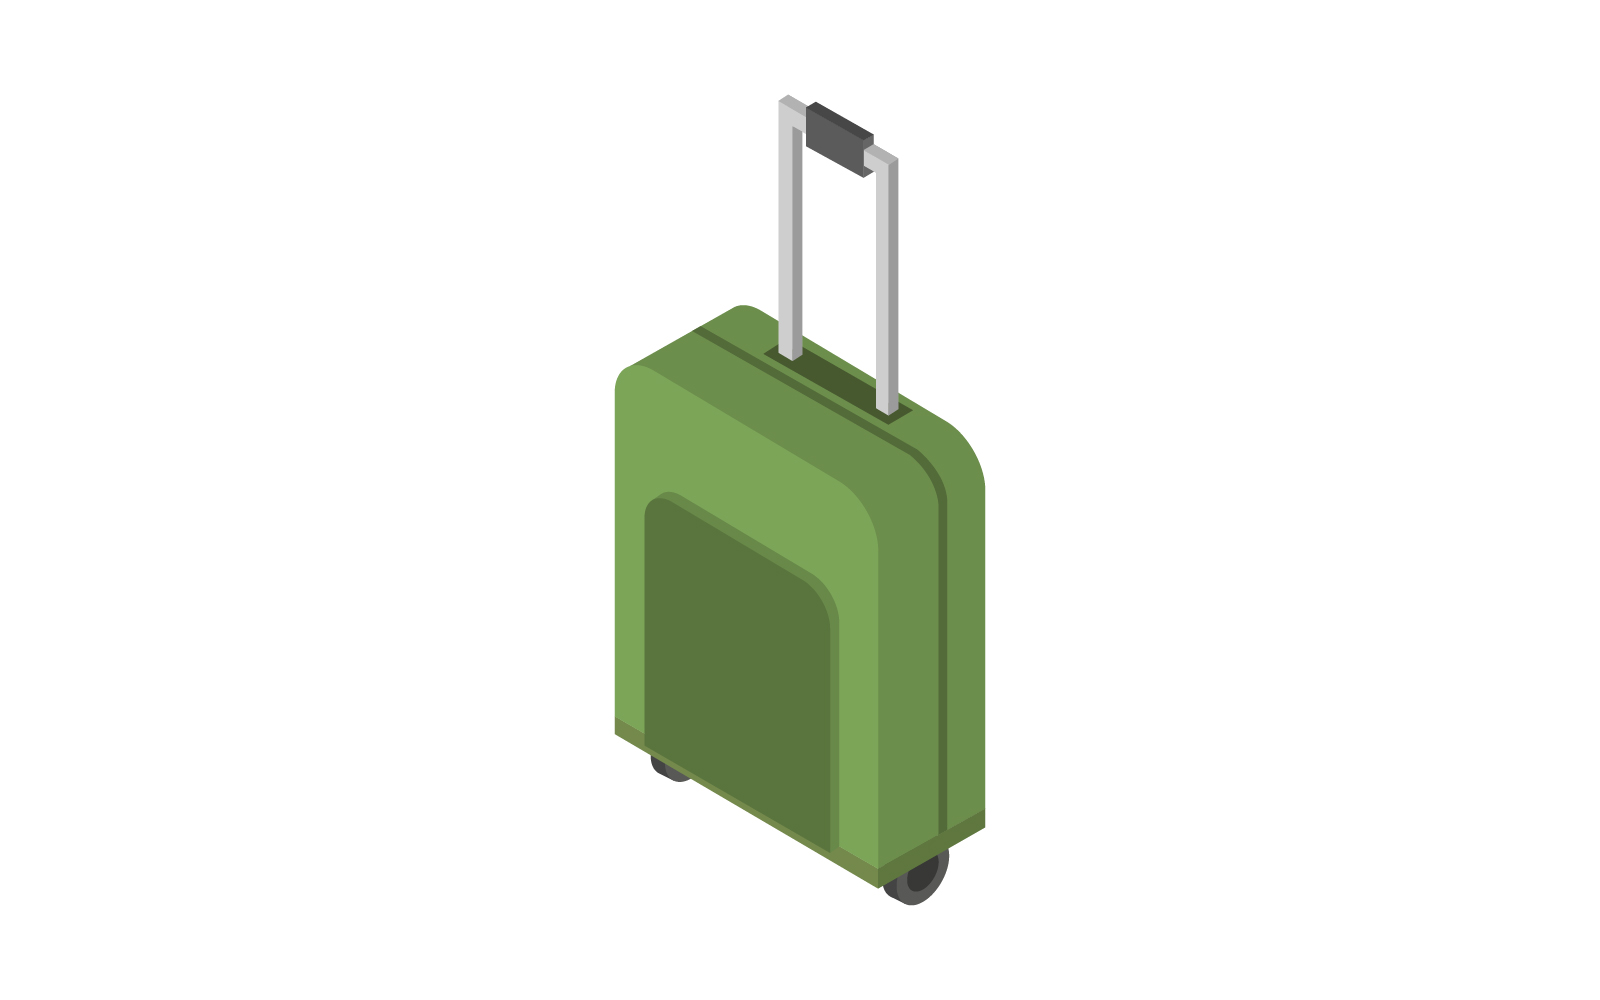 Travel suitcase illustrated on a white background